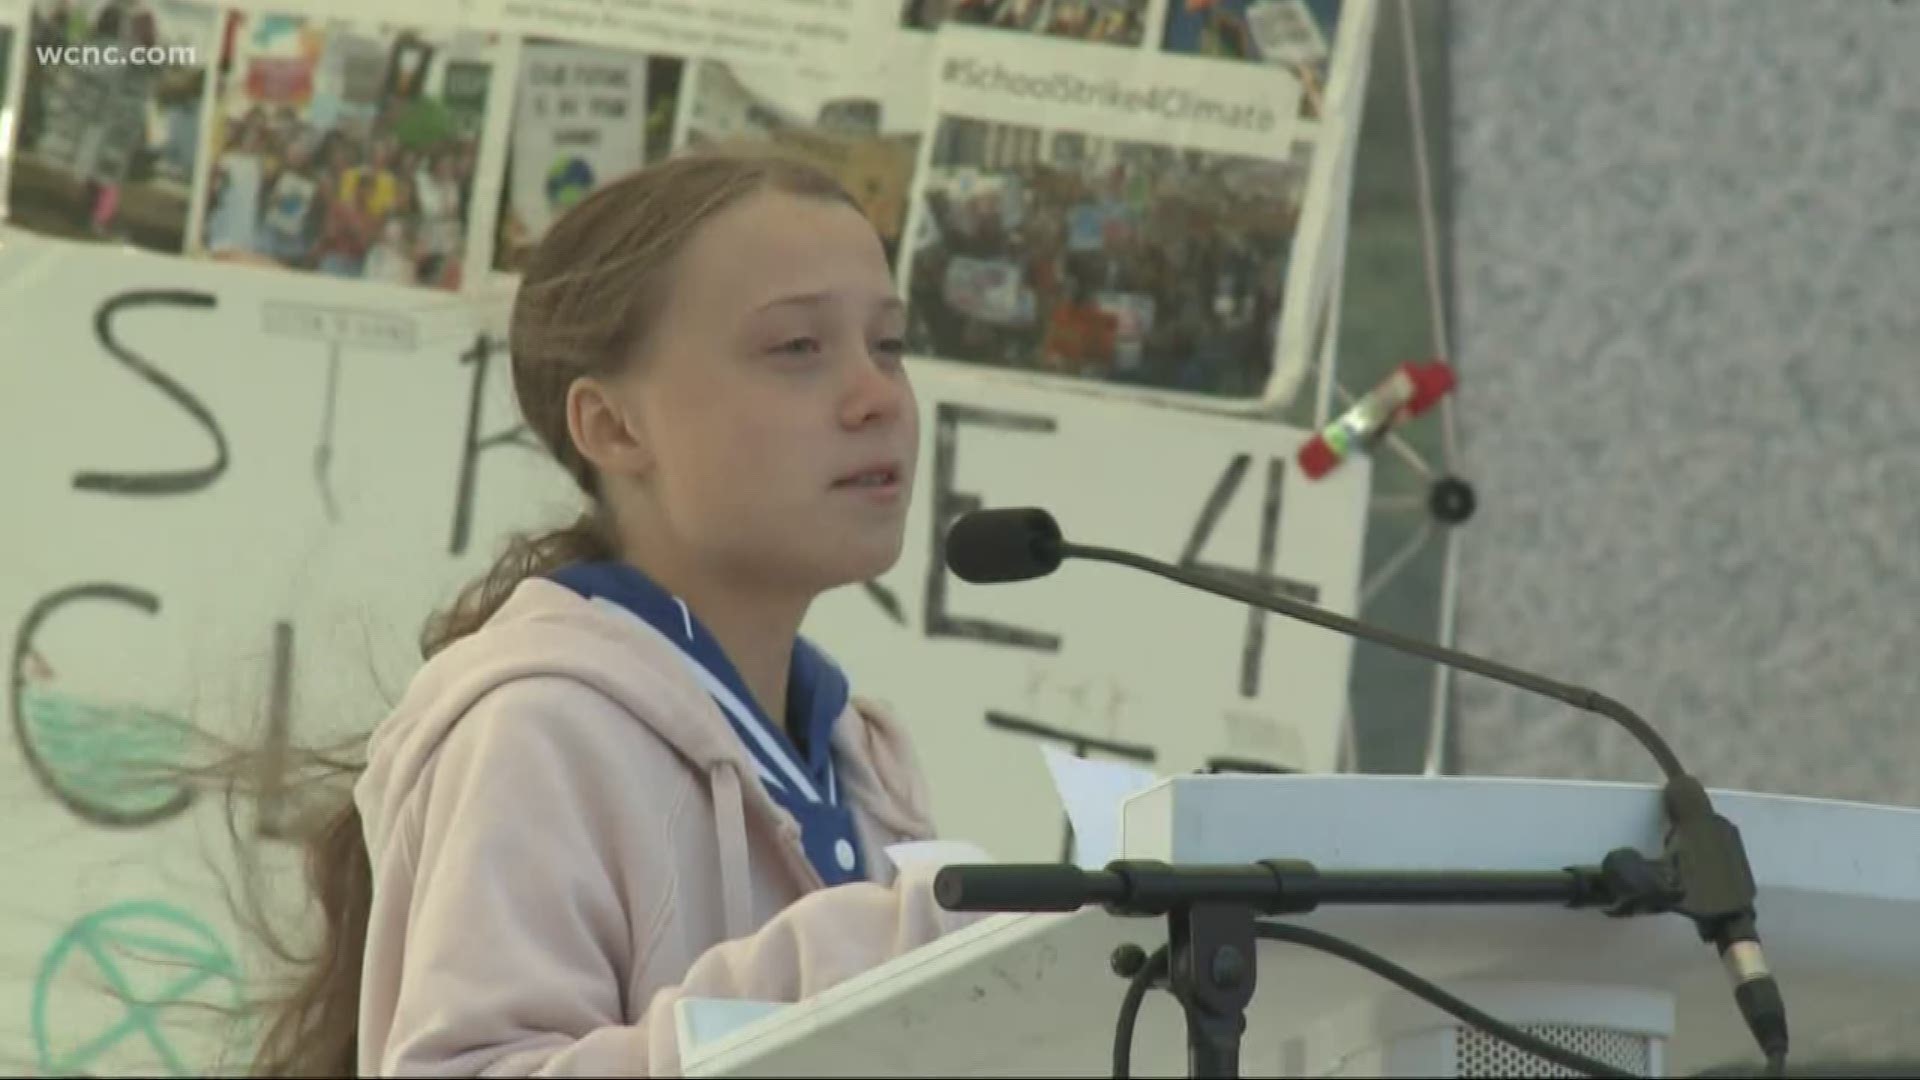 The crowd outside the government center interrupted the 16-year-old climate activist several times with applause as she said humanity is now at a crossroads.